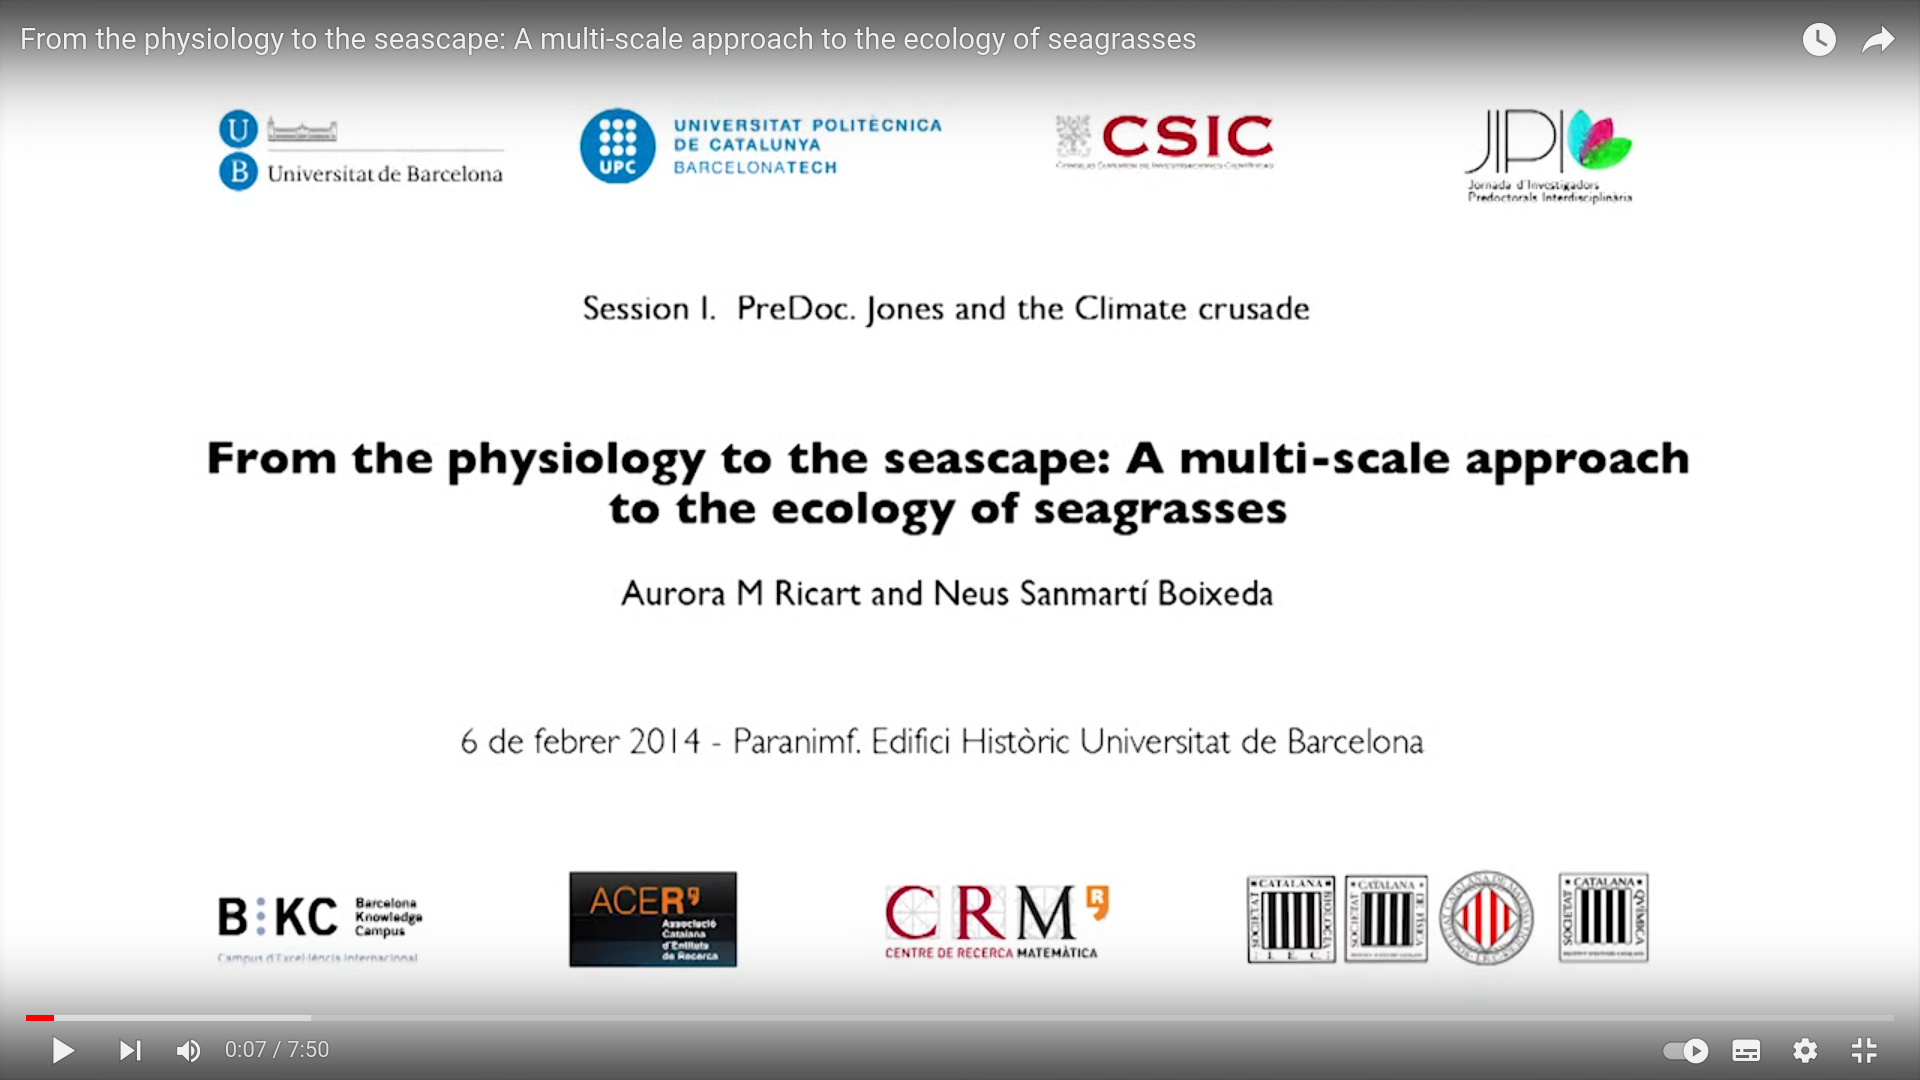 From Physiology to the Seascape. A Multi-Scale Approach to the Ecology of Seagrasses